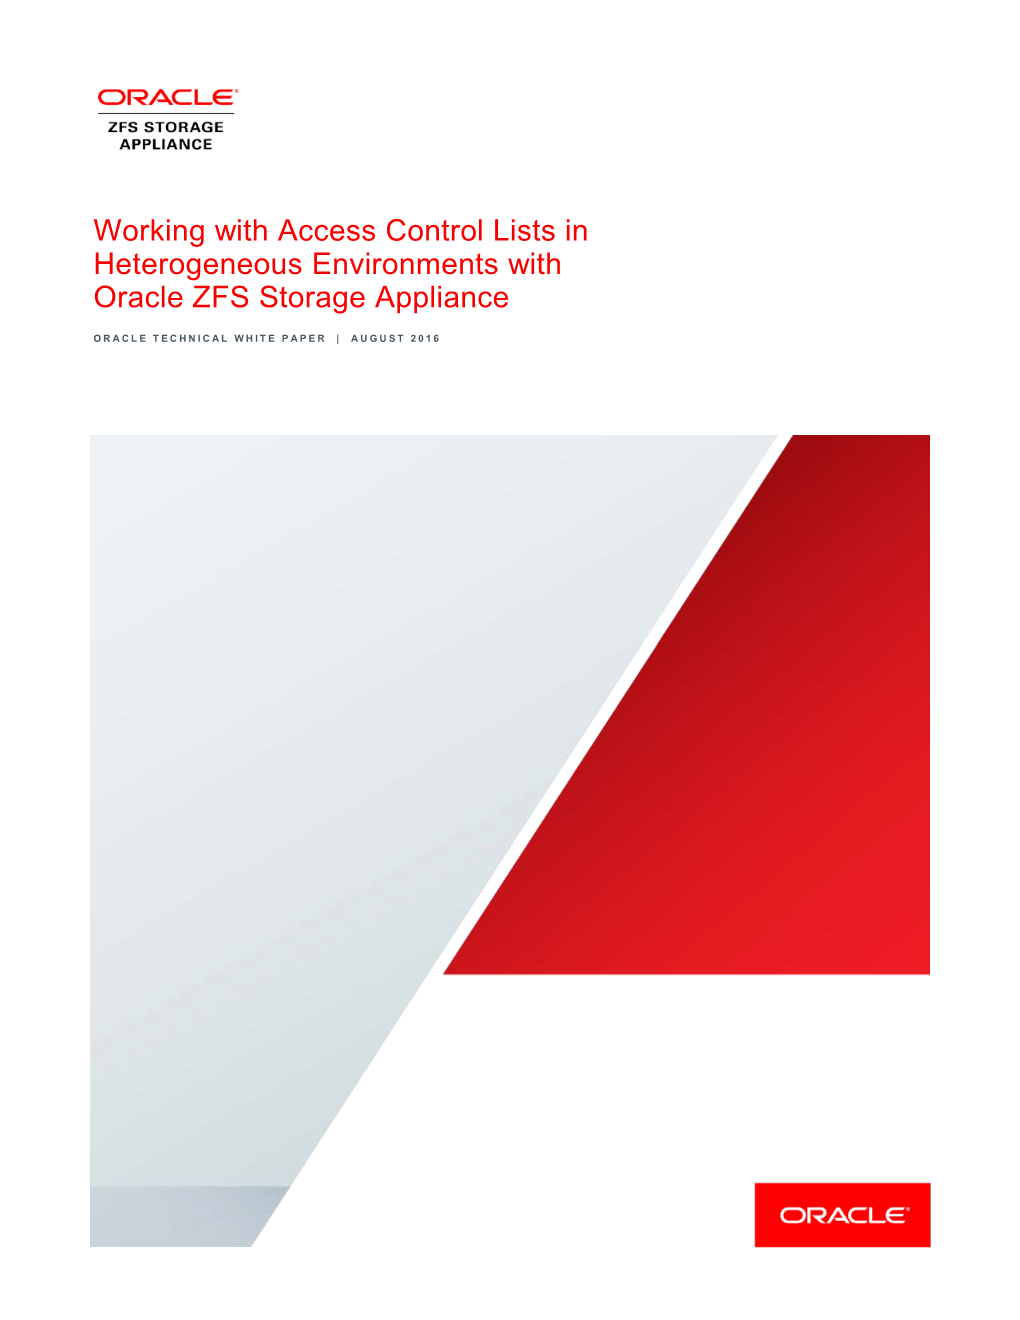 Working with Access Control Lists in Heterogeneous Environments with Oracle ZFS Storage Appliance